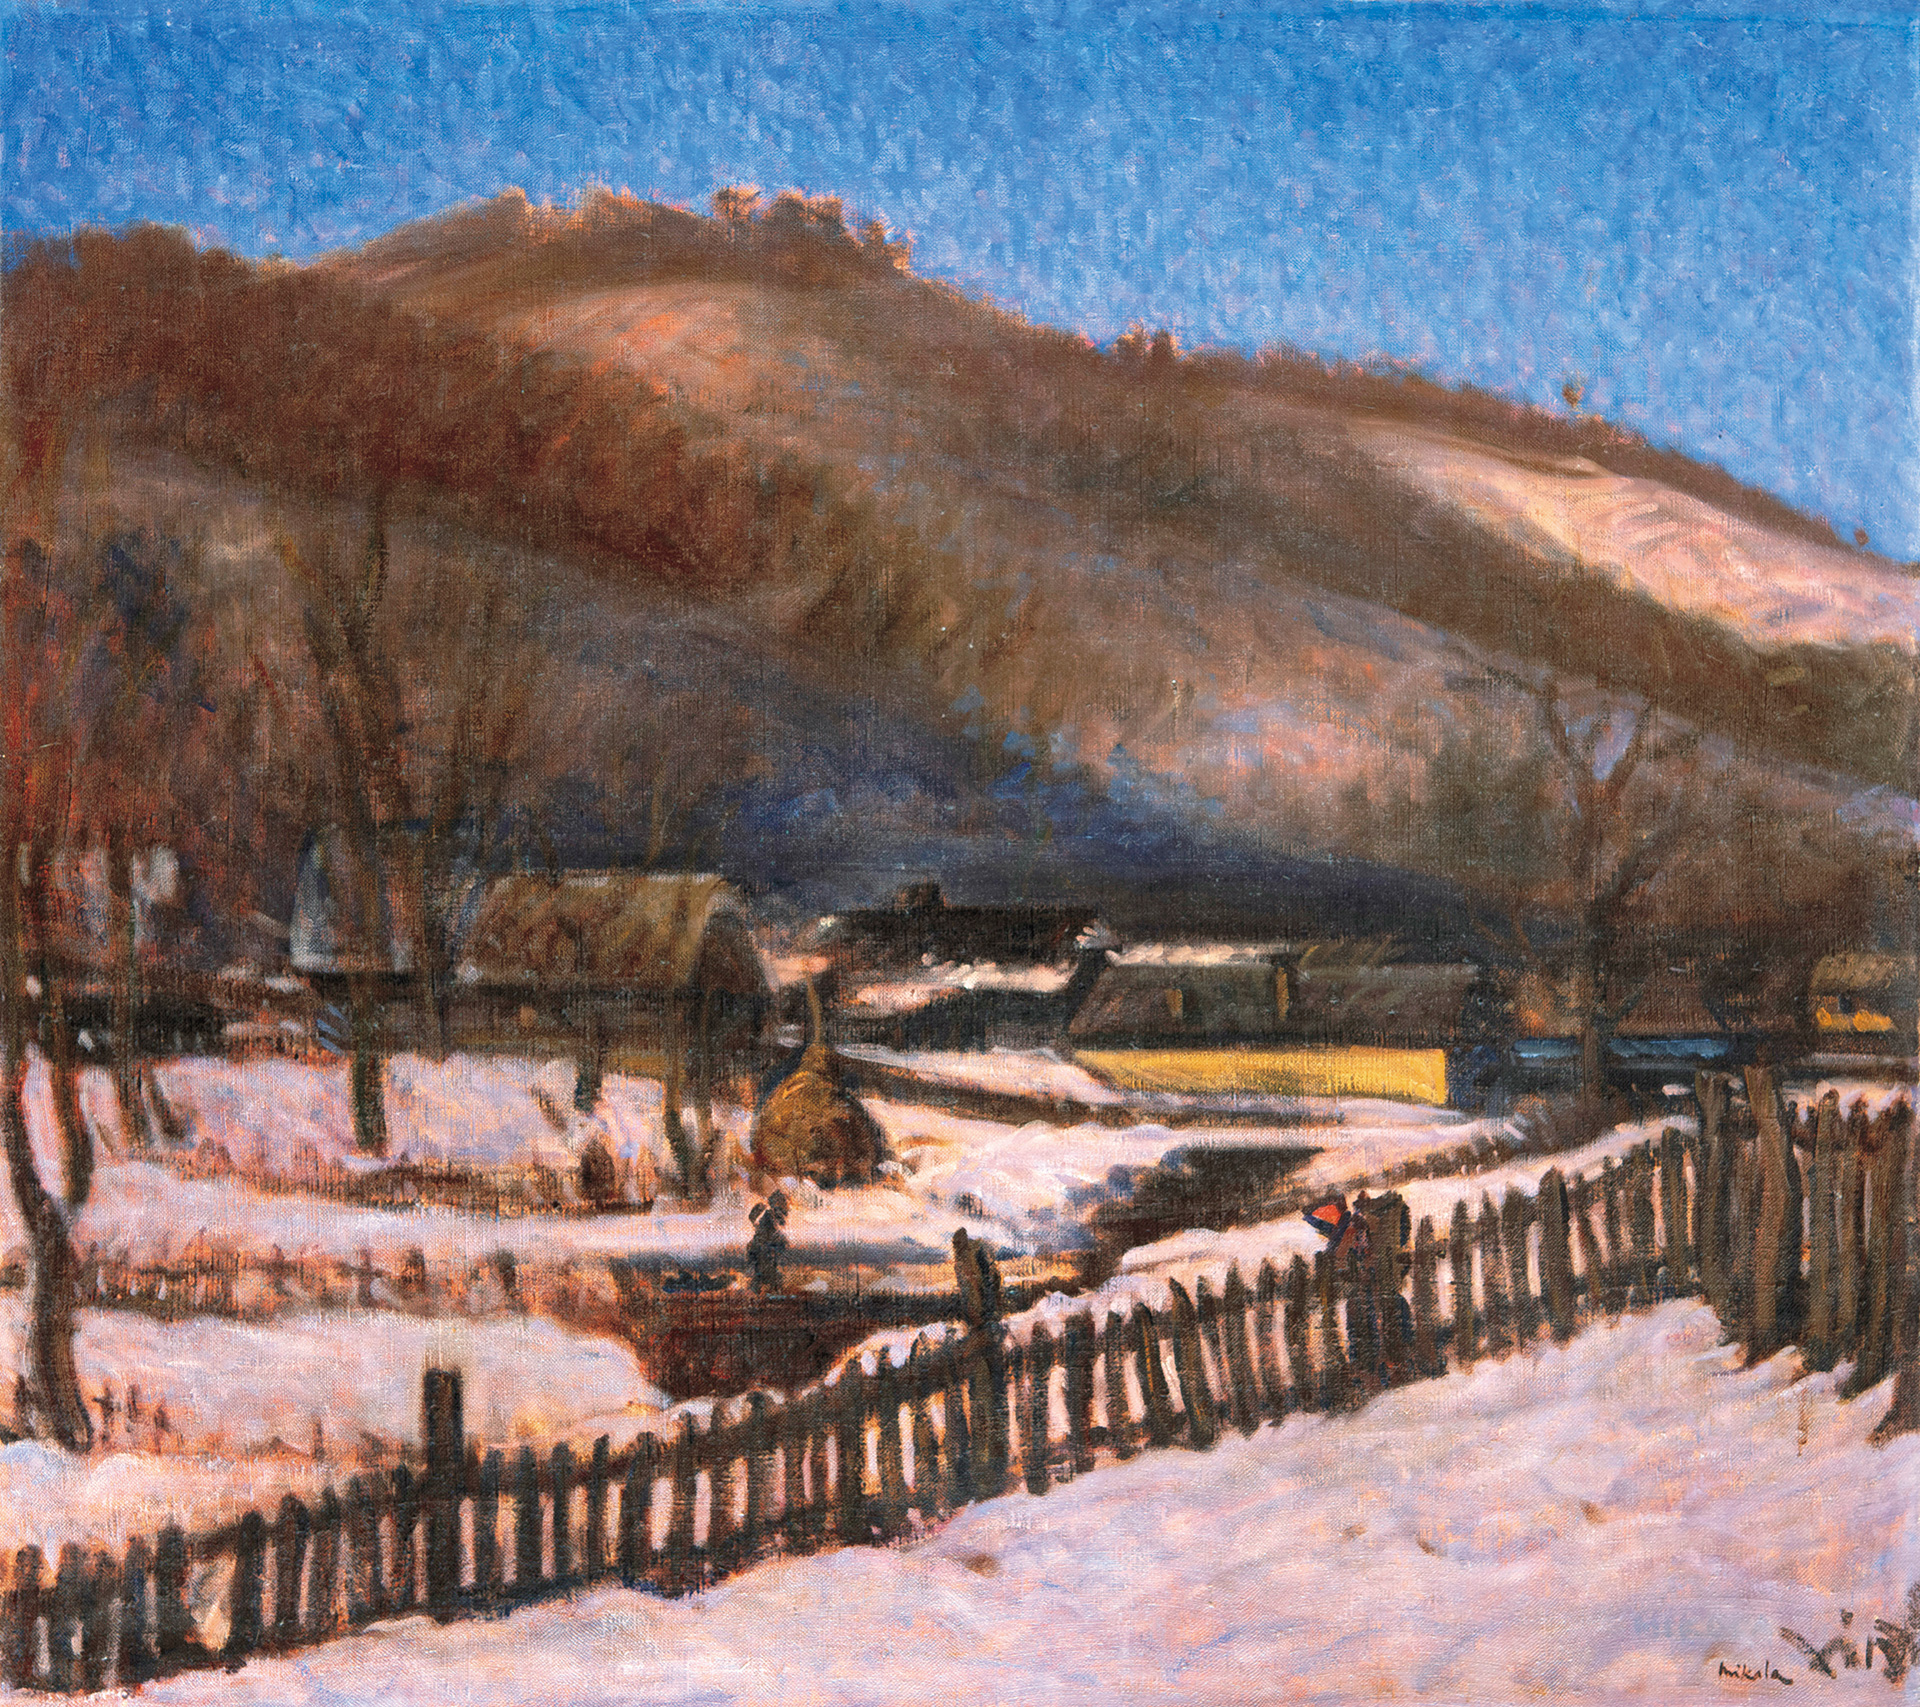 Mikola András (1884-1970) The End of Winter in Baia Mare